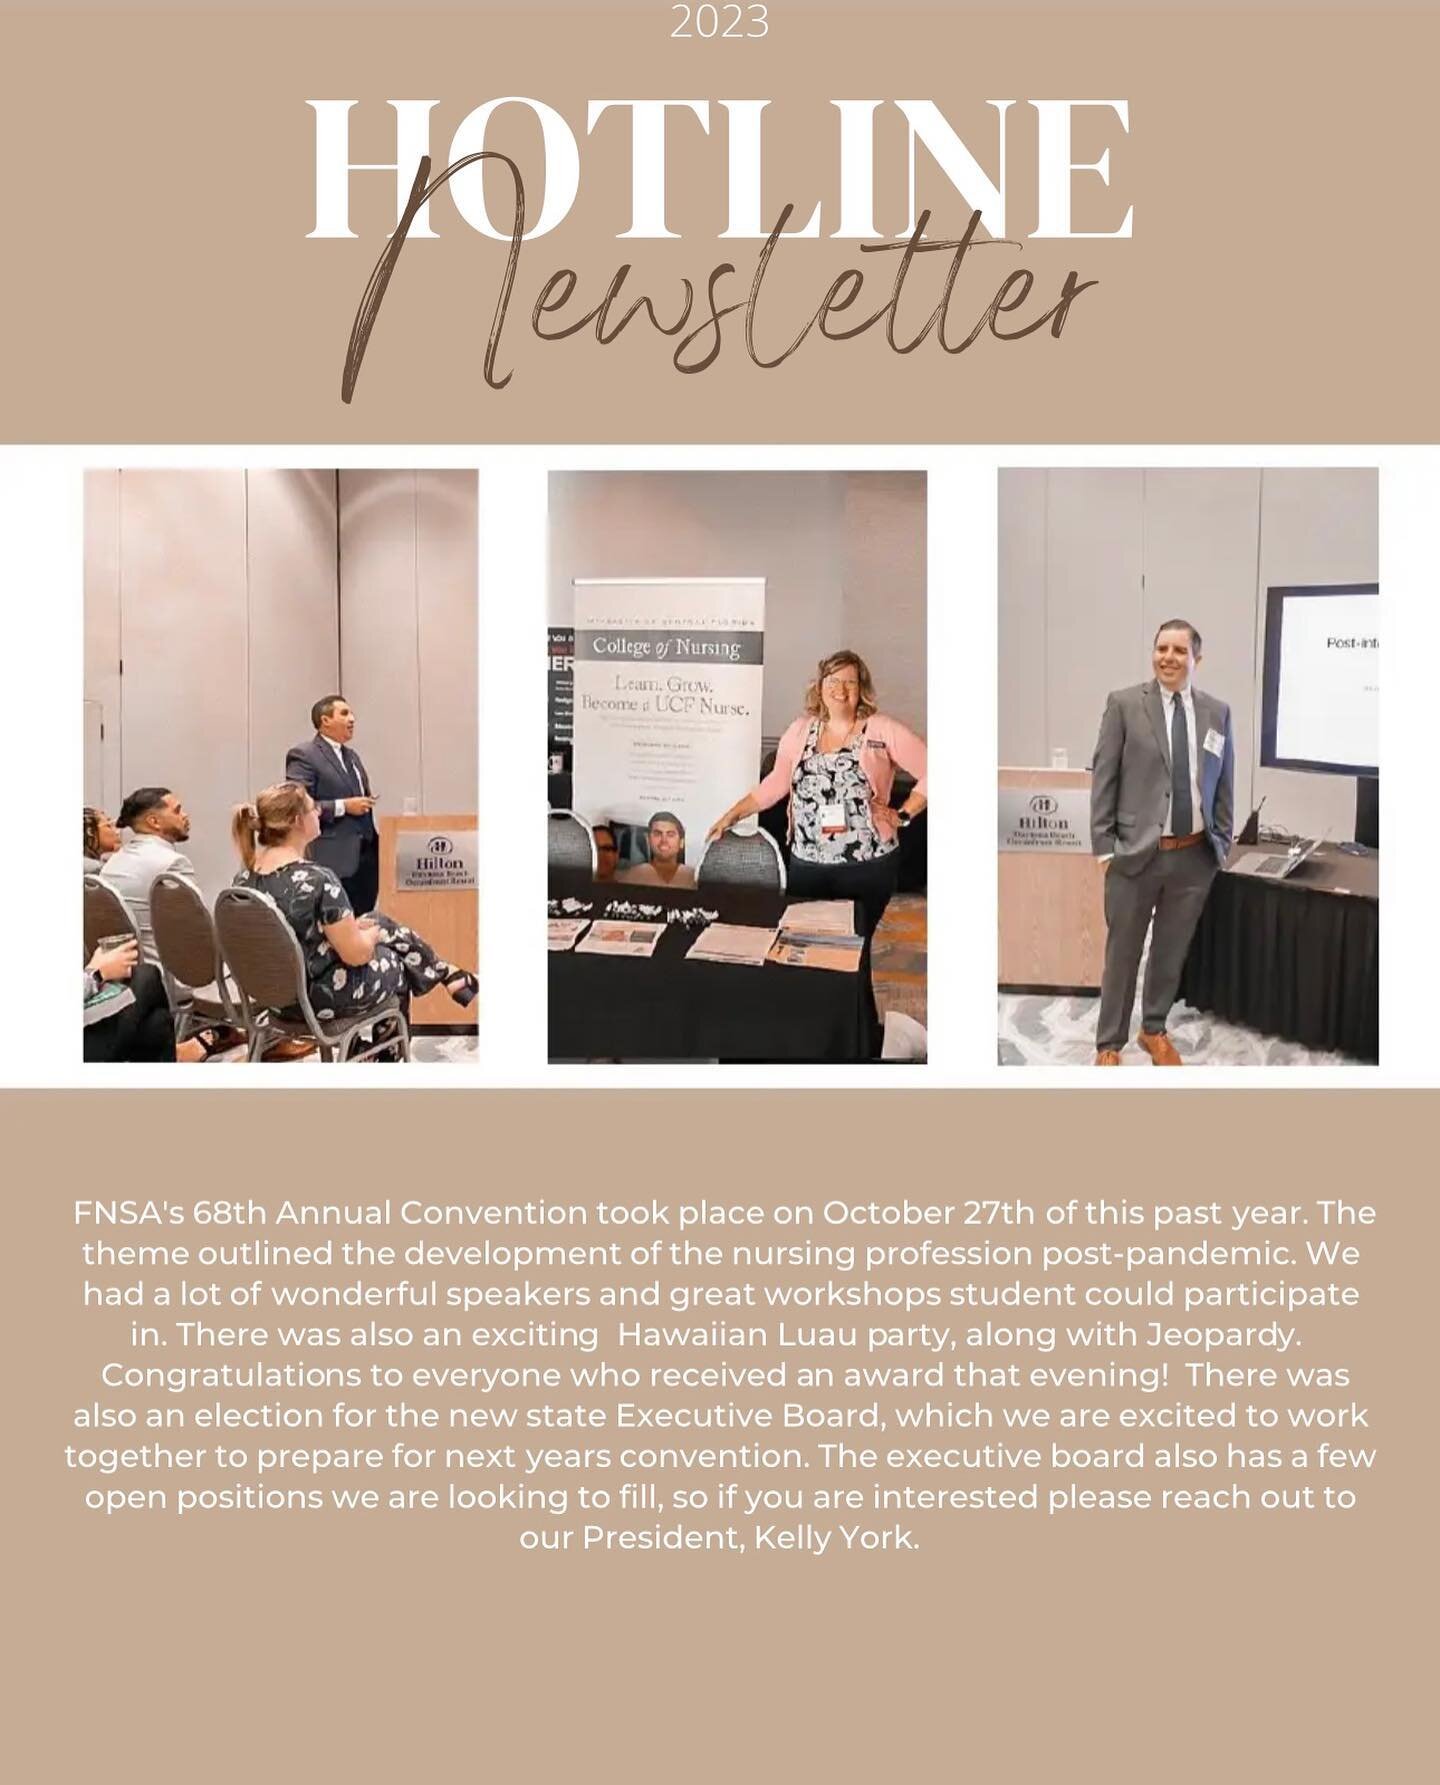 Here&rsquo;s a sneak peek at the latest edition of our Hotline Newsletter! Meet the new 2022-2023 FNSA Board and read the recap from 2022 State Convention in Daytona! View the full newsletter at fnsa.net!